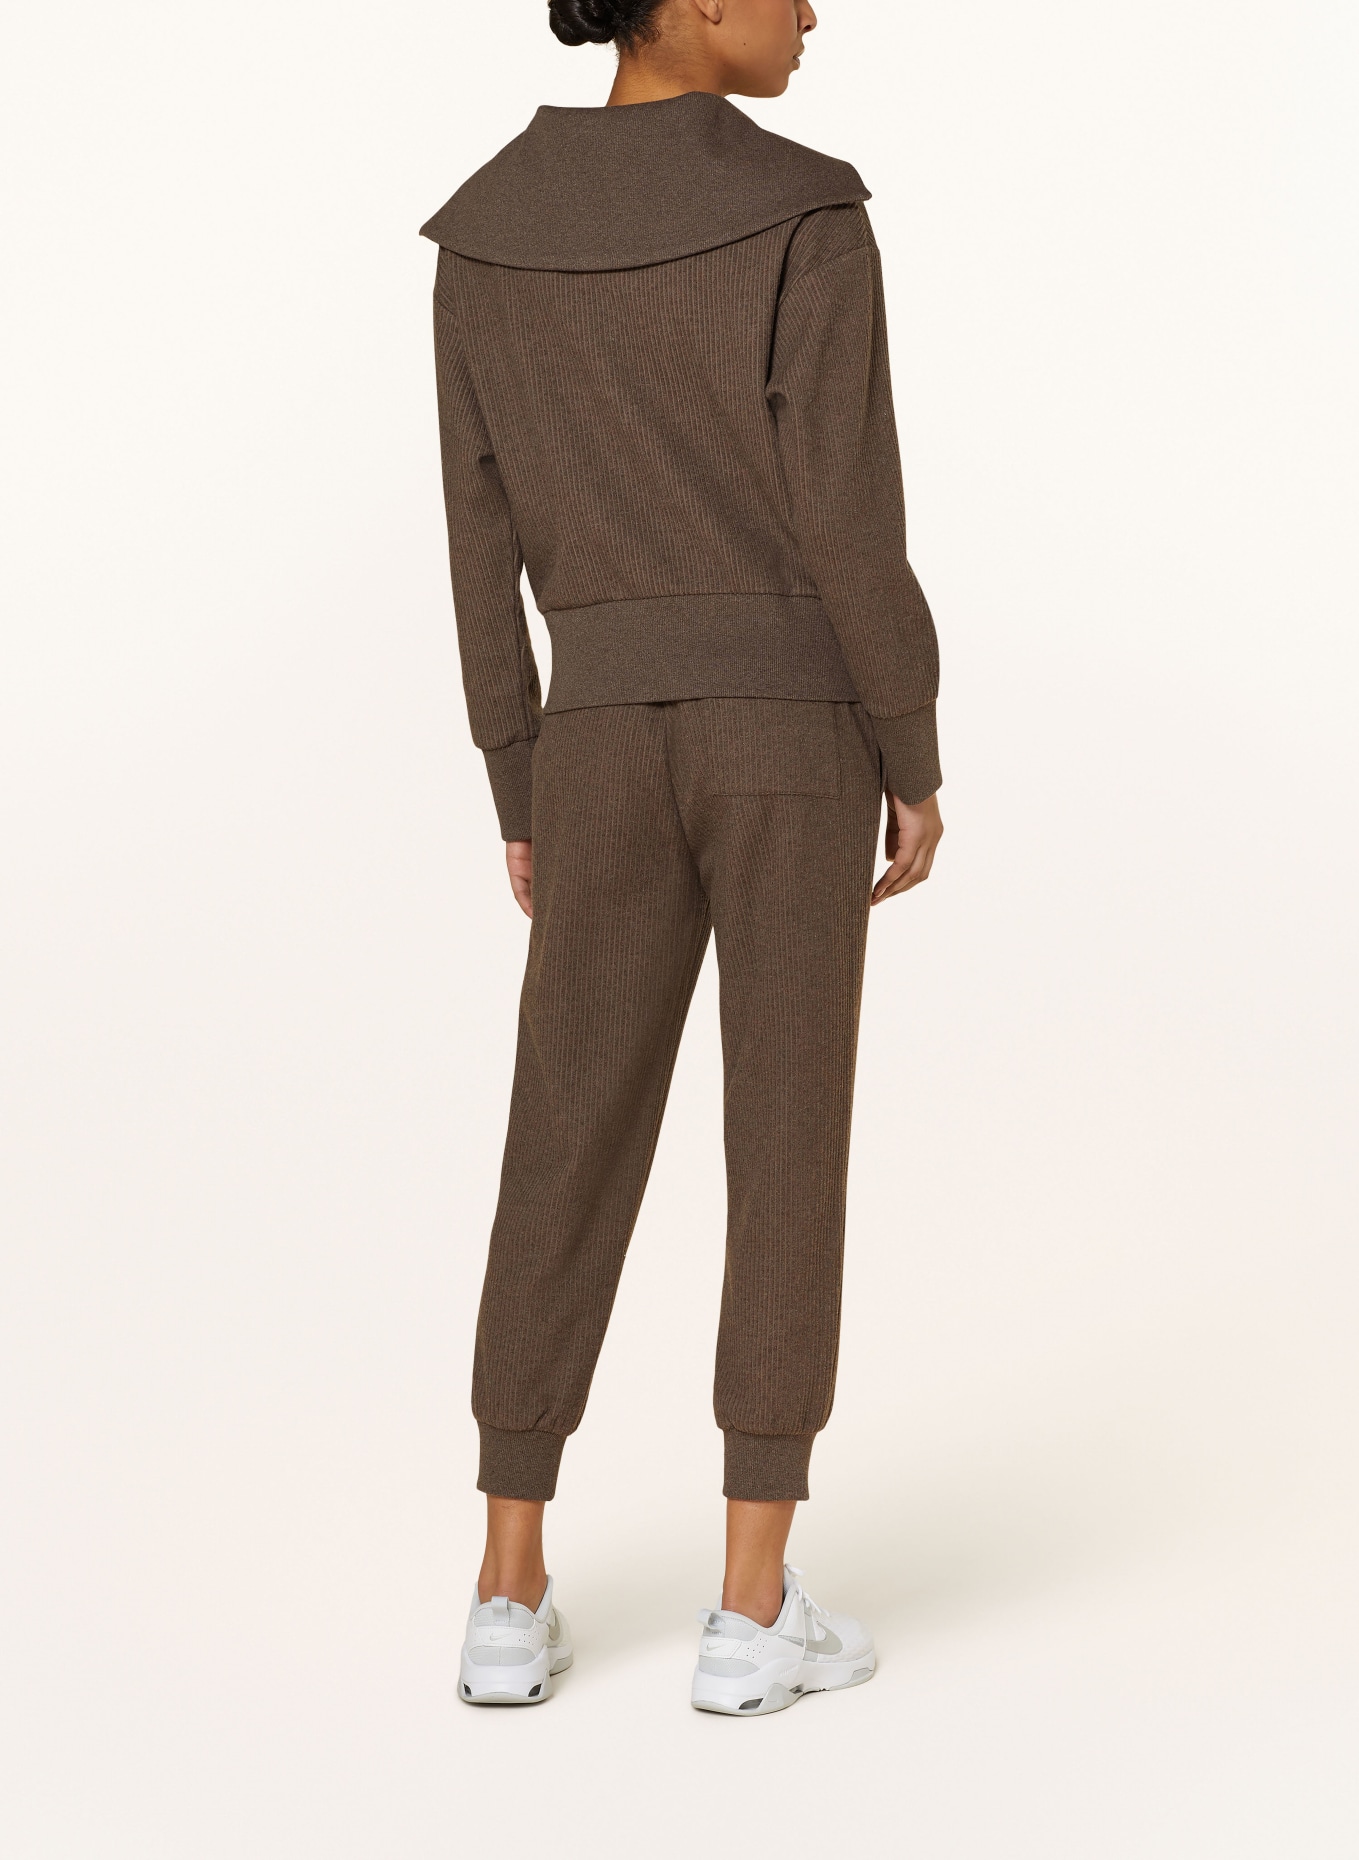 VARLEY Pants RUSSELL in jogger style, Color: BROWN (Image 3)